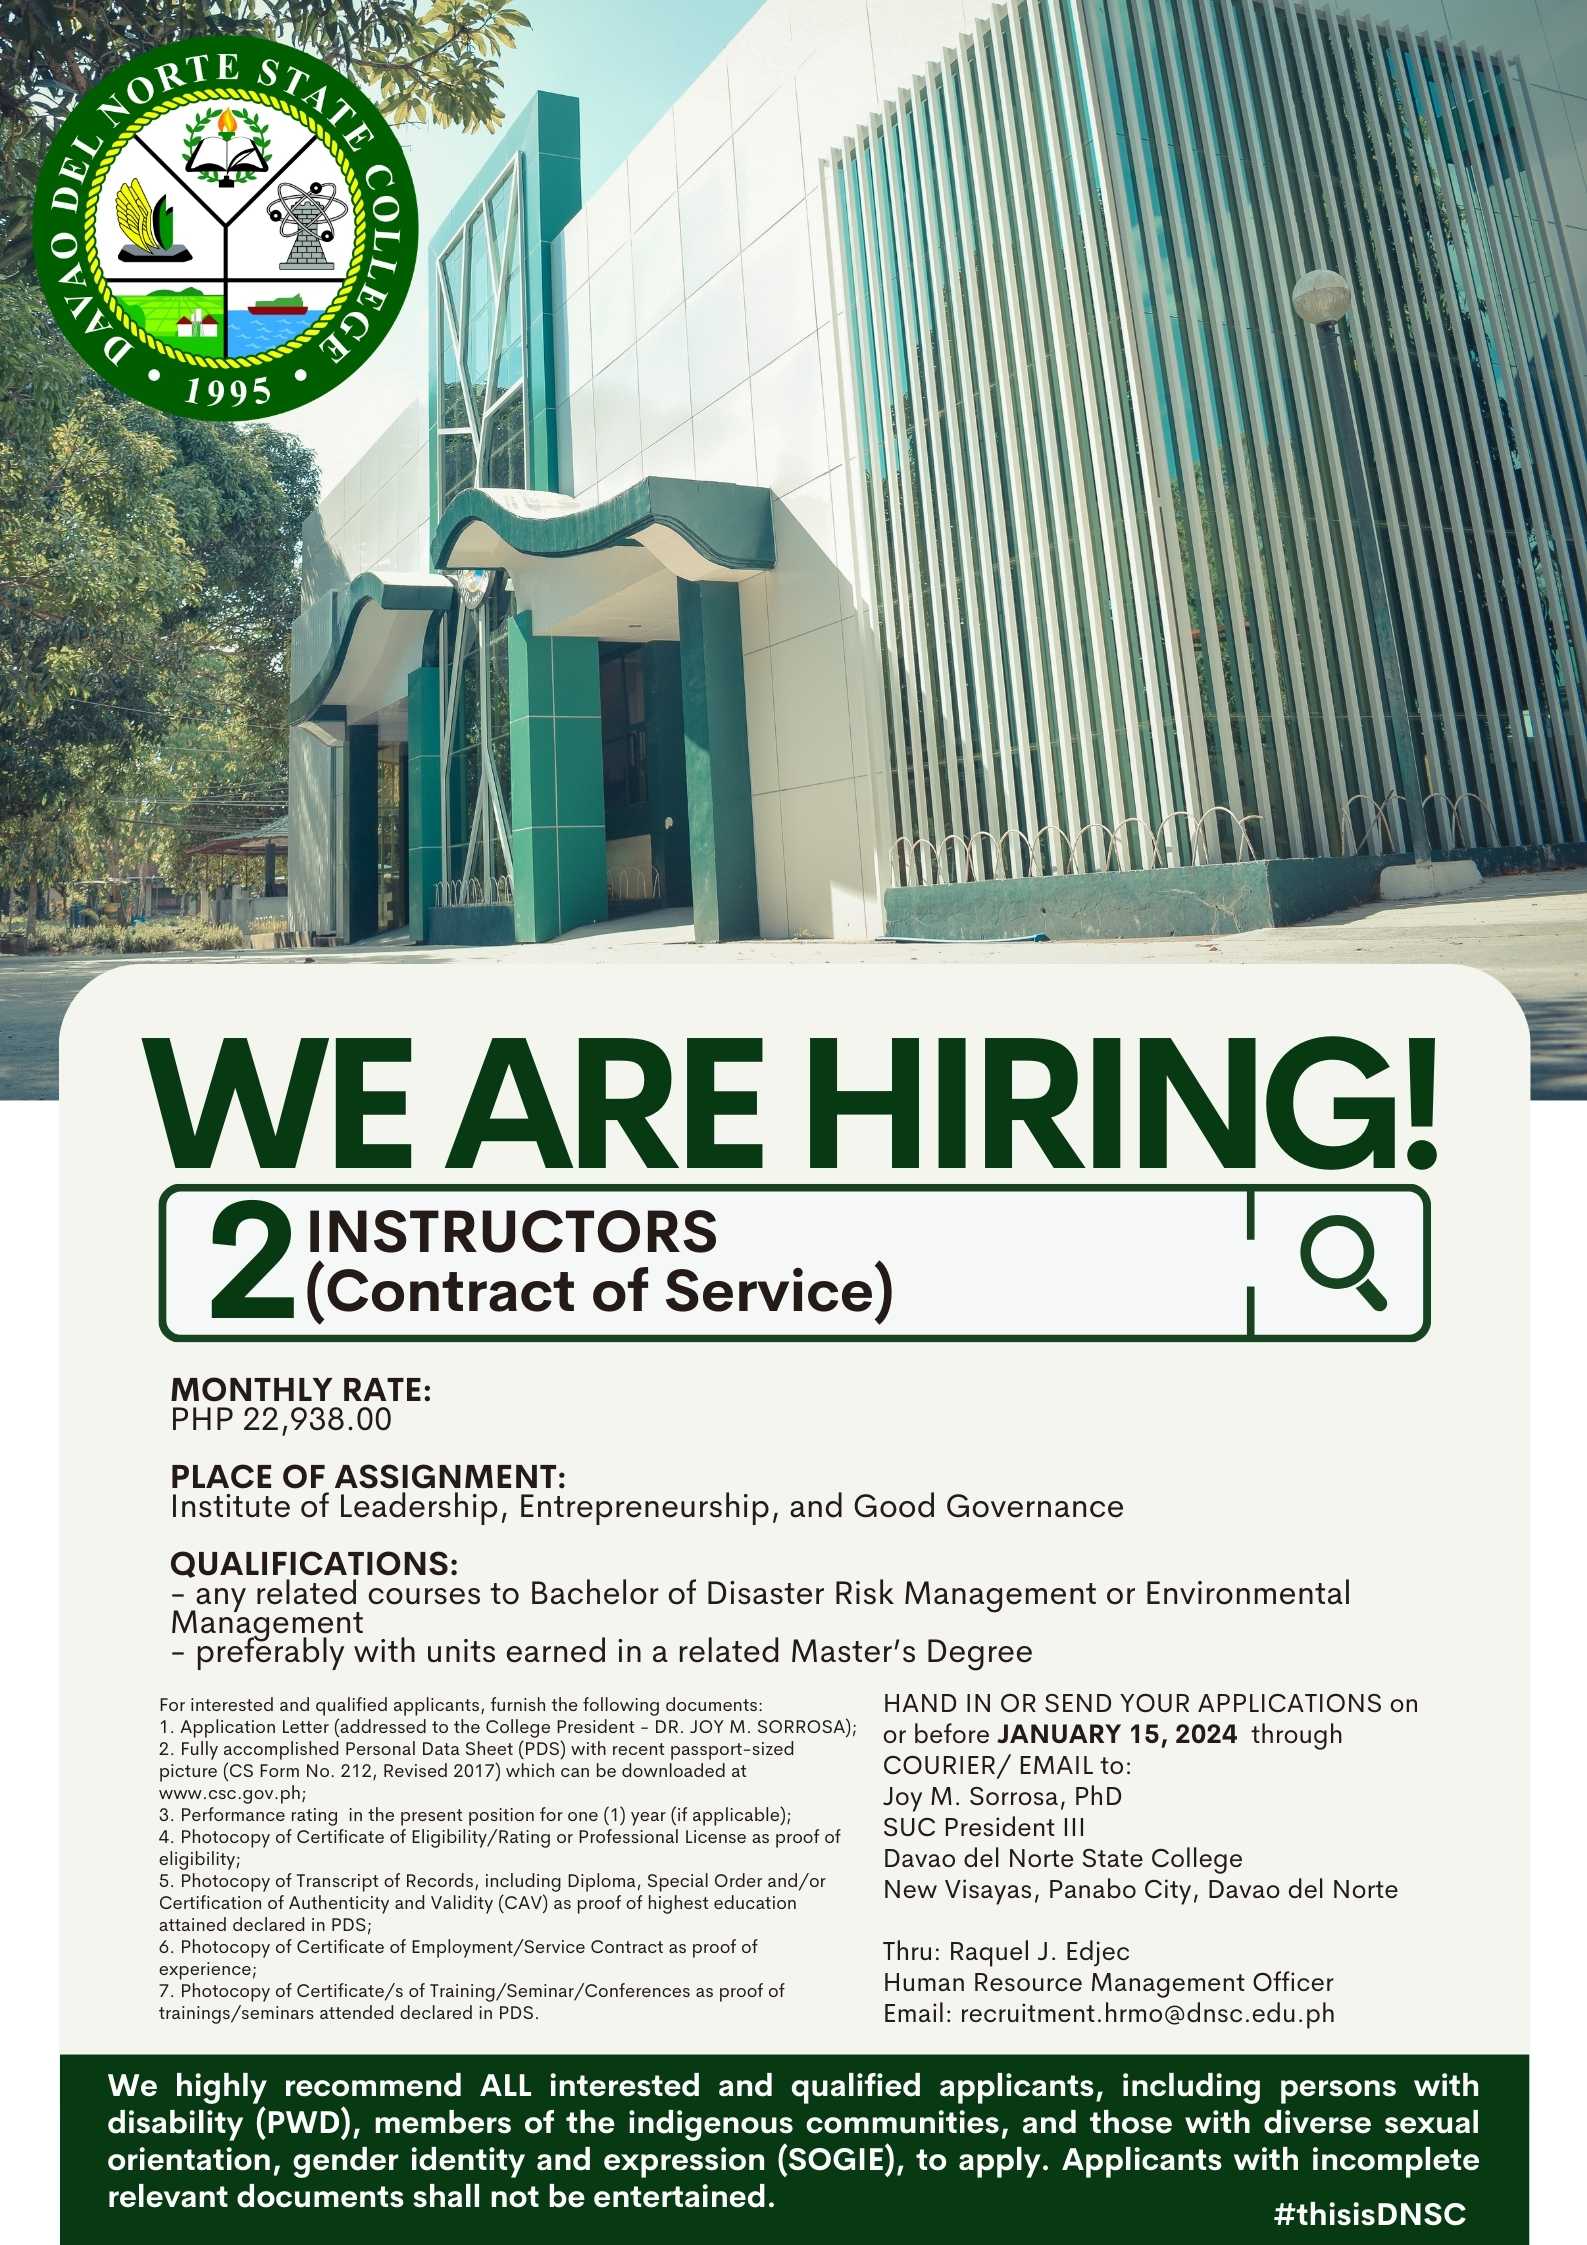 [Hiring] 8 Instructors (Contract of Service). Hand in or email your applications ON OR BEFORE JANUARY 15, 2024.